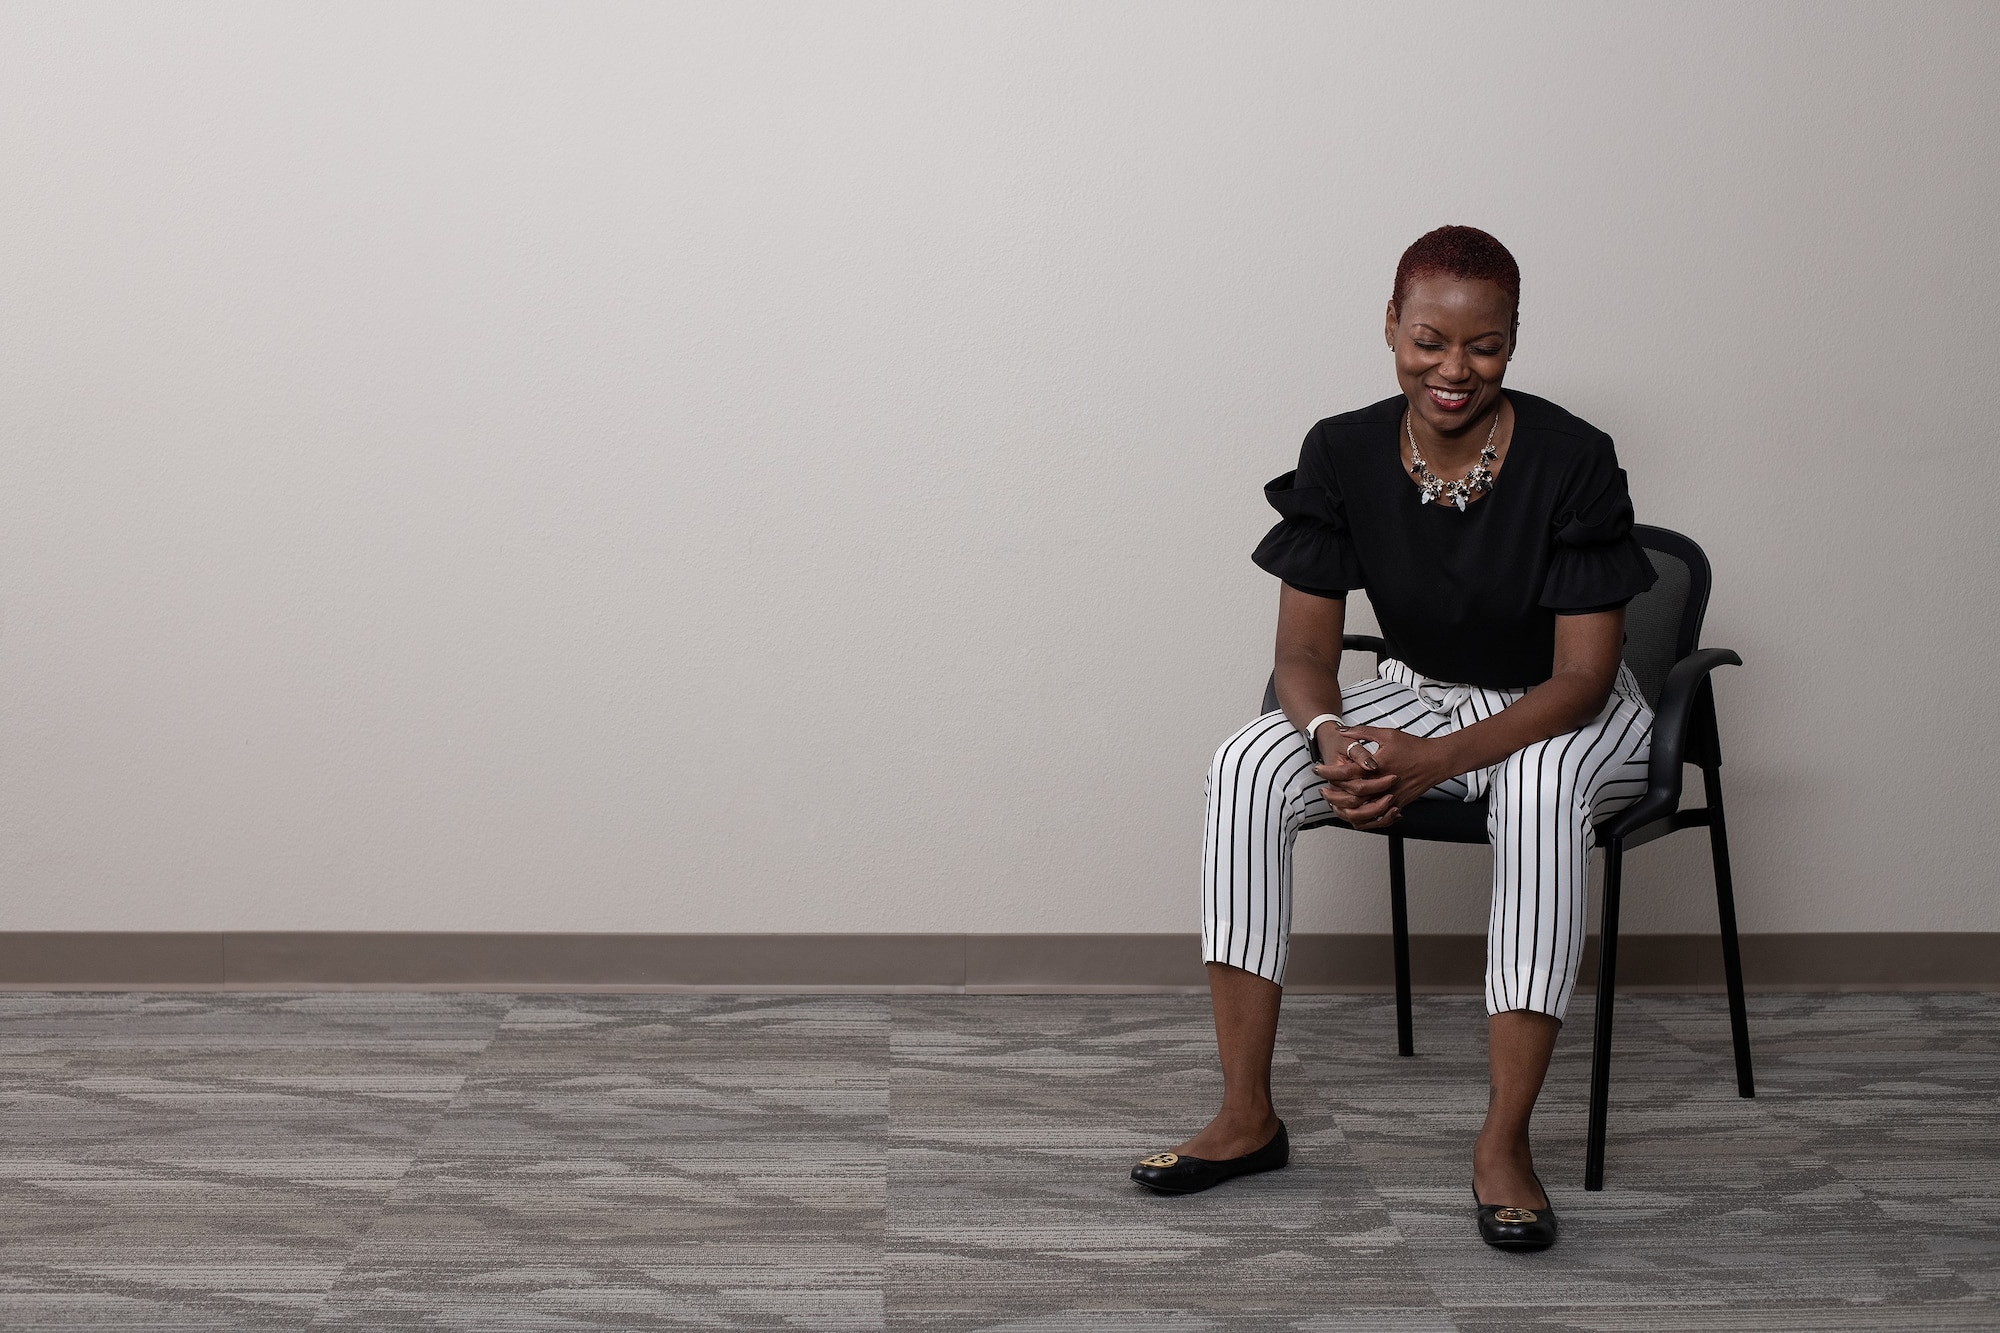 Ms. Charlene White, director of psychological health at the 137th Special Operations Wing, poses for a portrait taken at Will Rogers Air National Guard Base in Oklahoma City, Sep. 19, 2019.